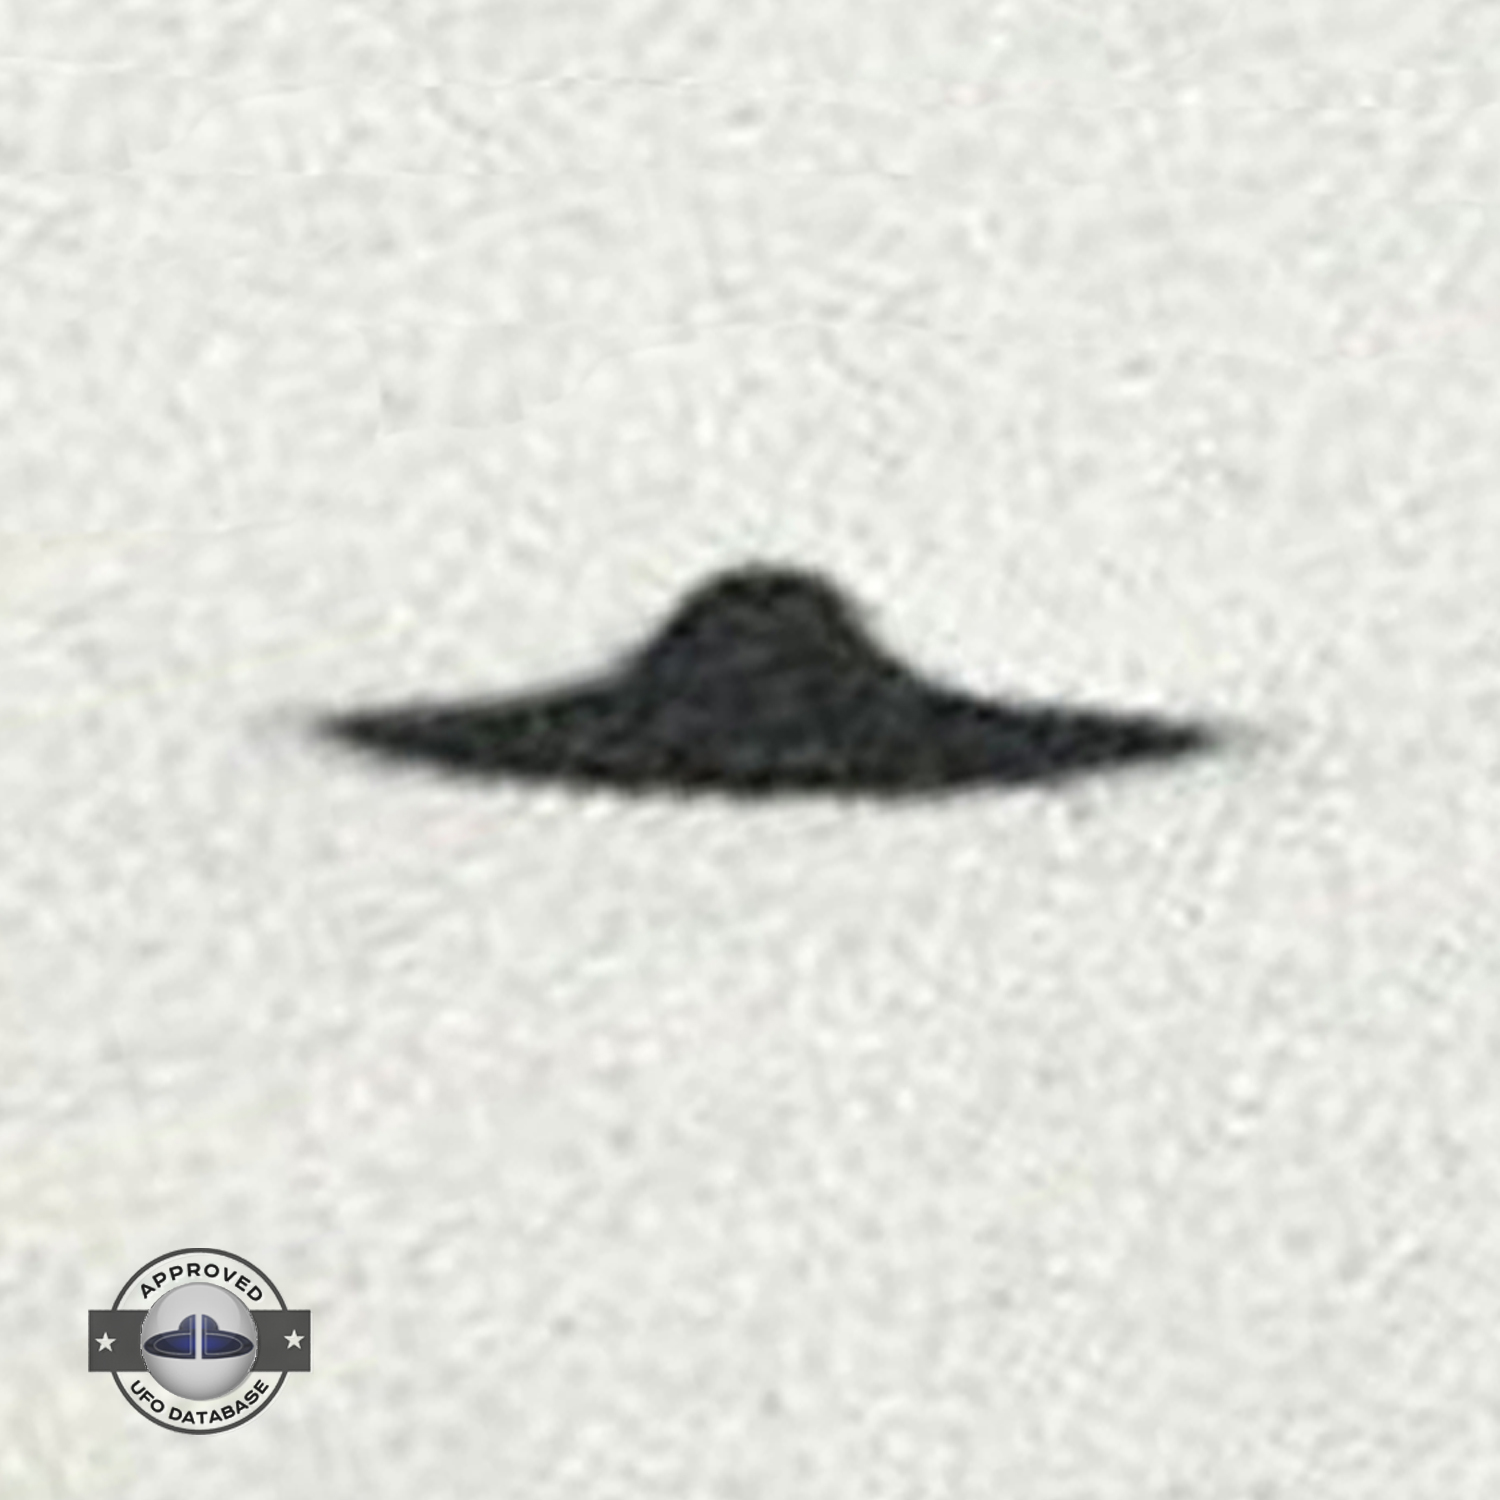 UFO picture lack of three dimensional aspect. 3 UFOs are very similar UFO Picture #136-5